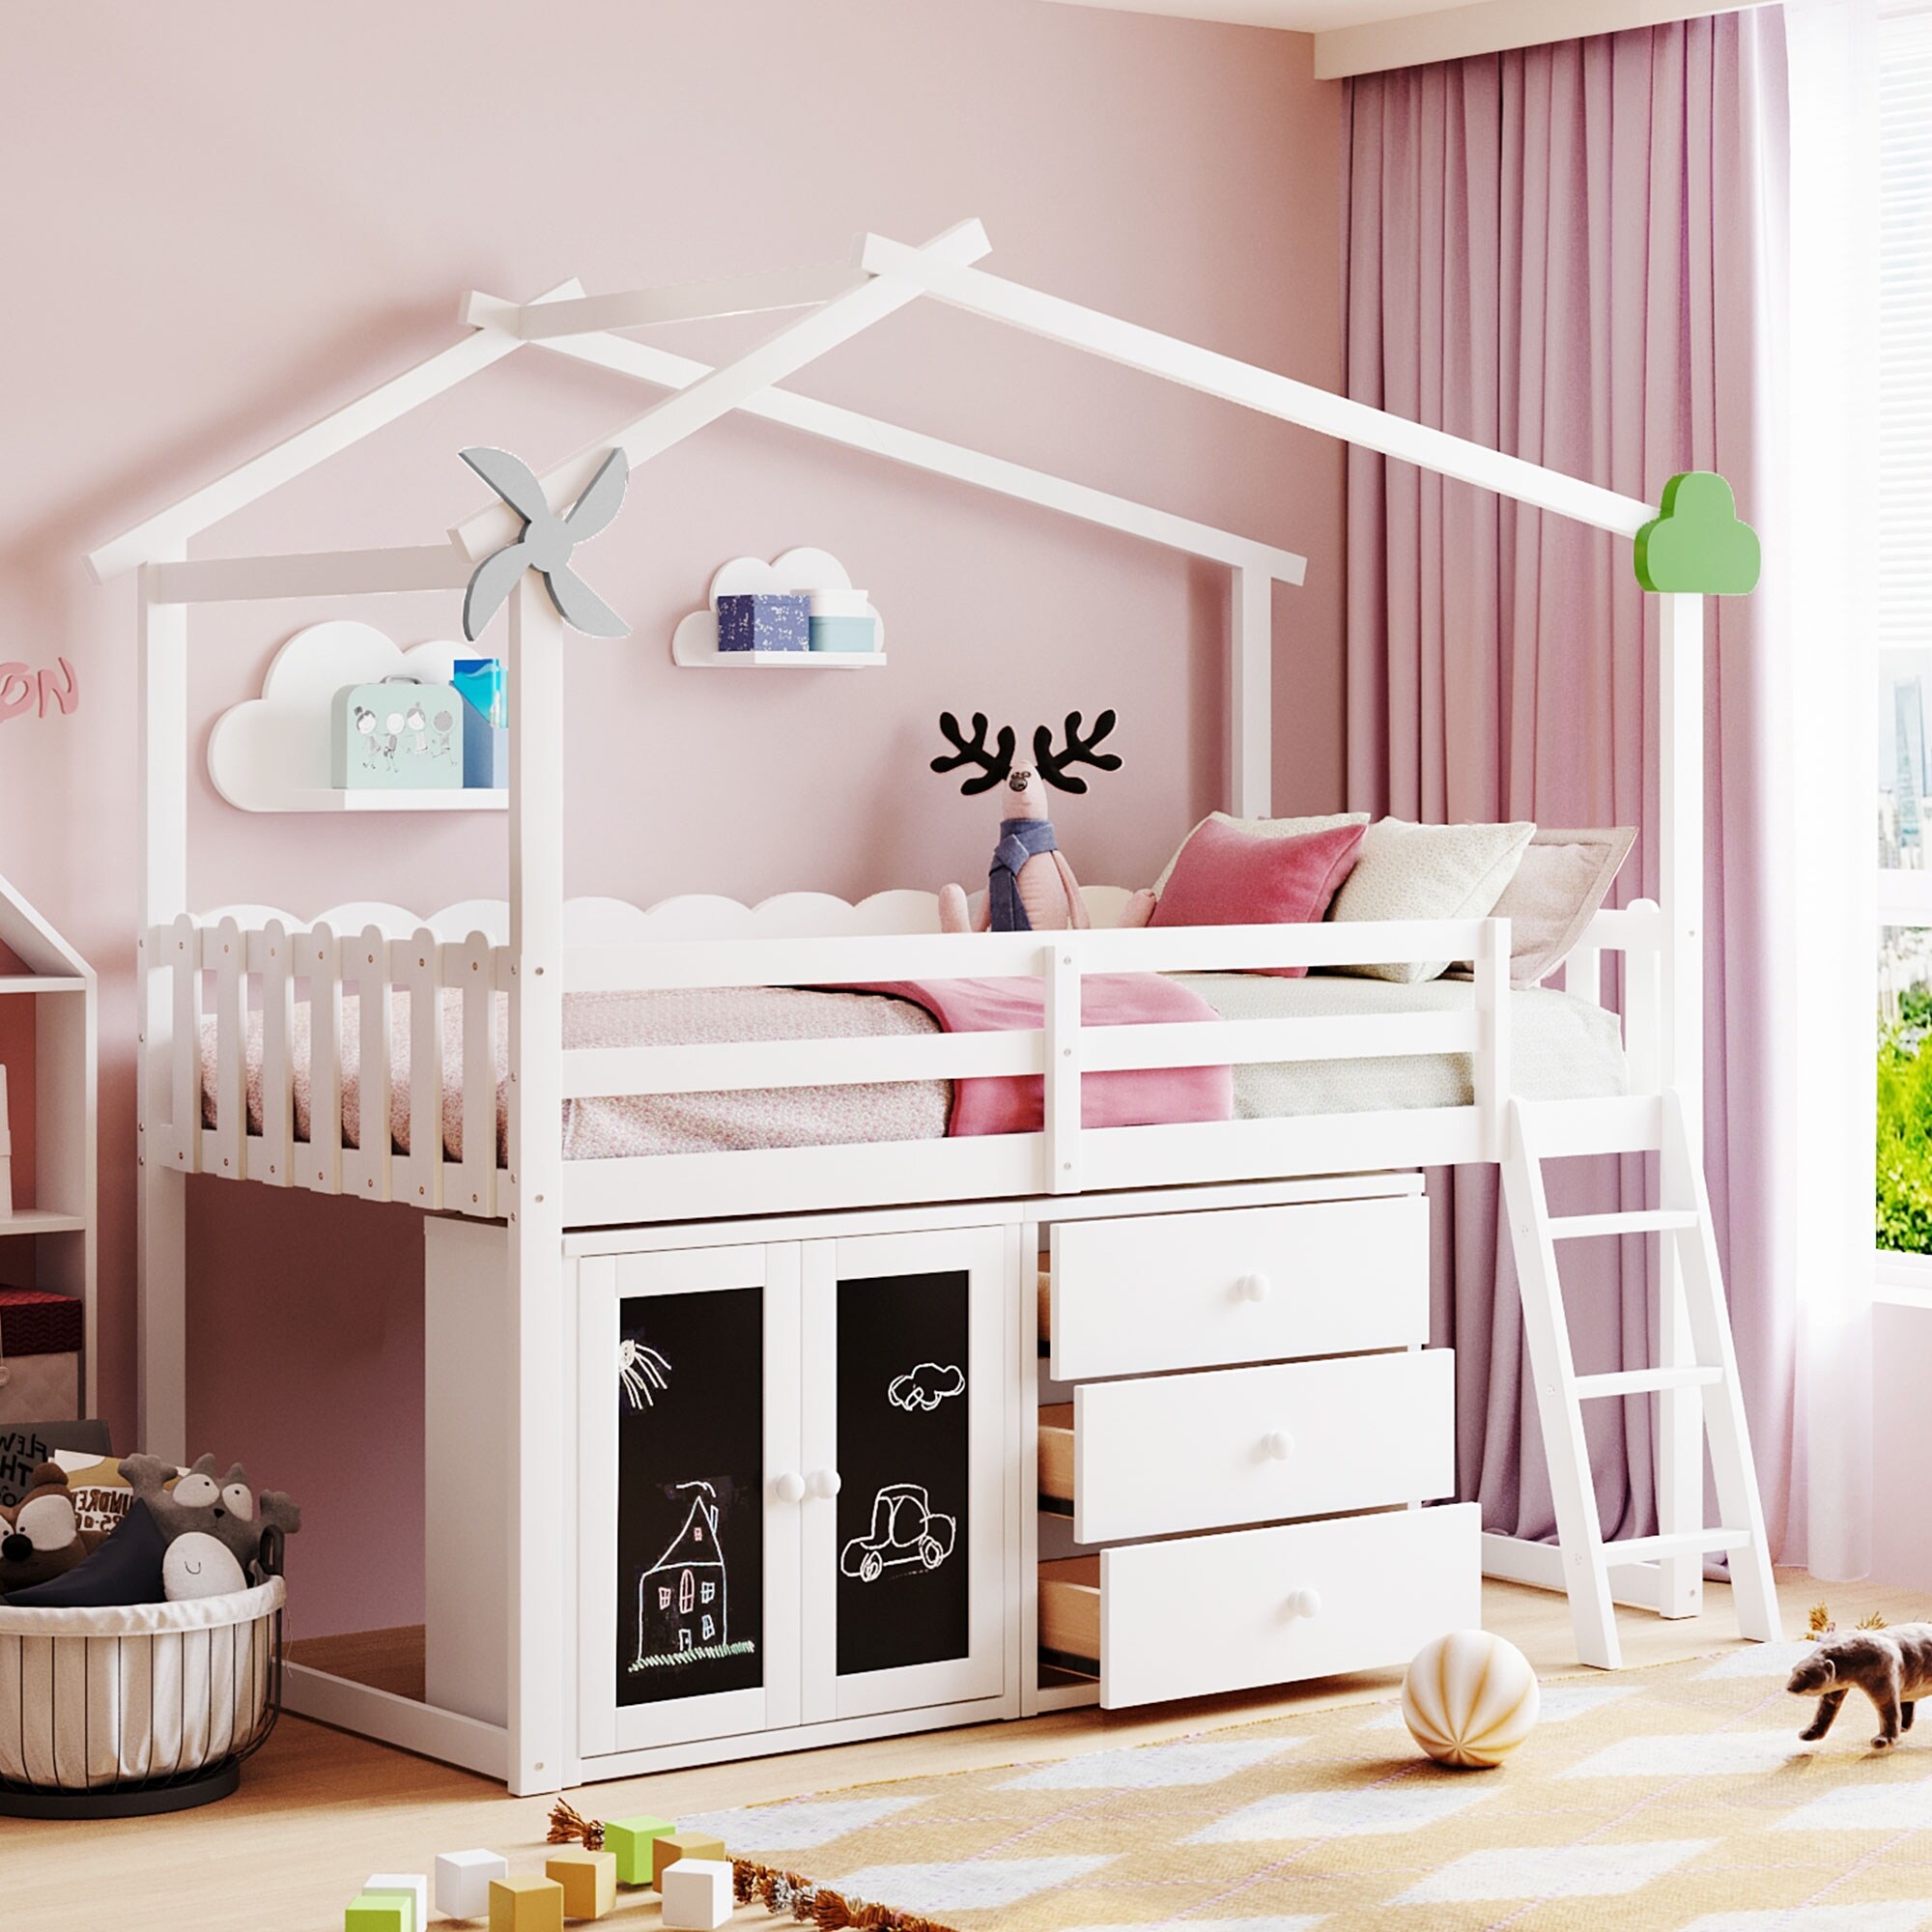 https://ak1.ostkcdn.com/images/products/is/images/direct/4a221d0db7858f9c11eff75d55a84b2297a86f7e/Twin-Size-House-Bed-Low-Loft-Beds-for-Kids%2C-Wood-Playhouse-Lofts-Bed-with-Drawers-and-Cabinet%2C-Montessori-Loft-Bed-w--Blackboard.jpg